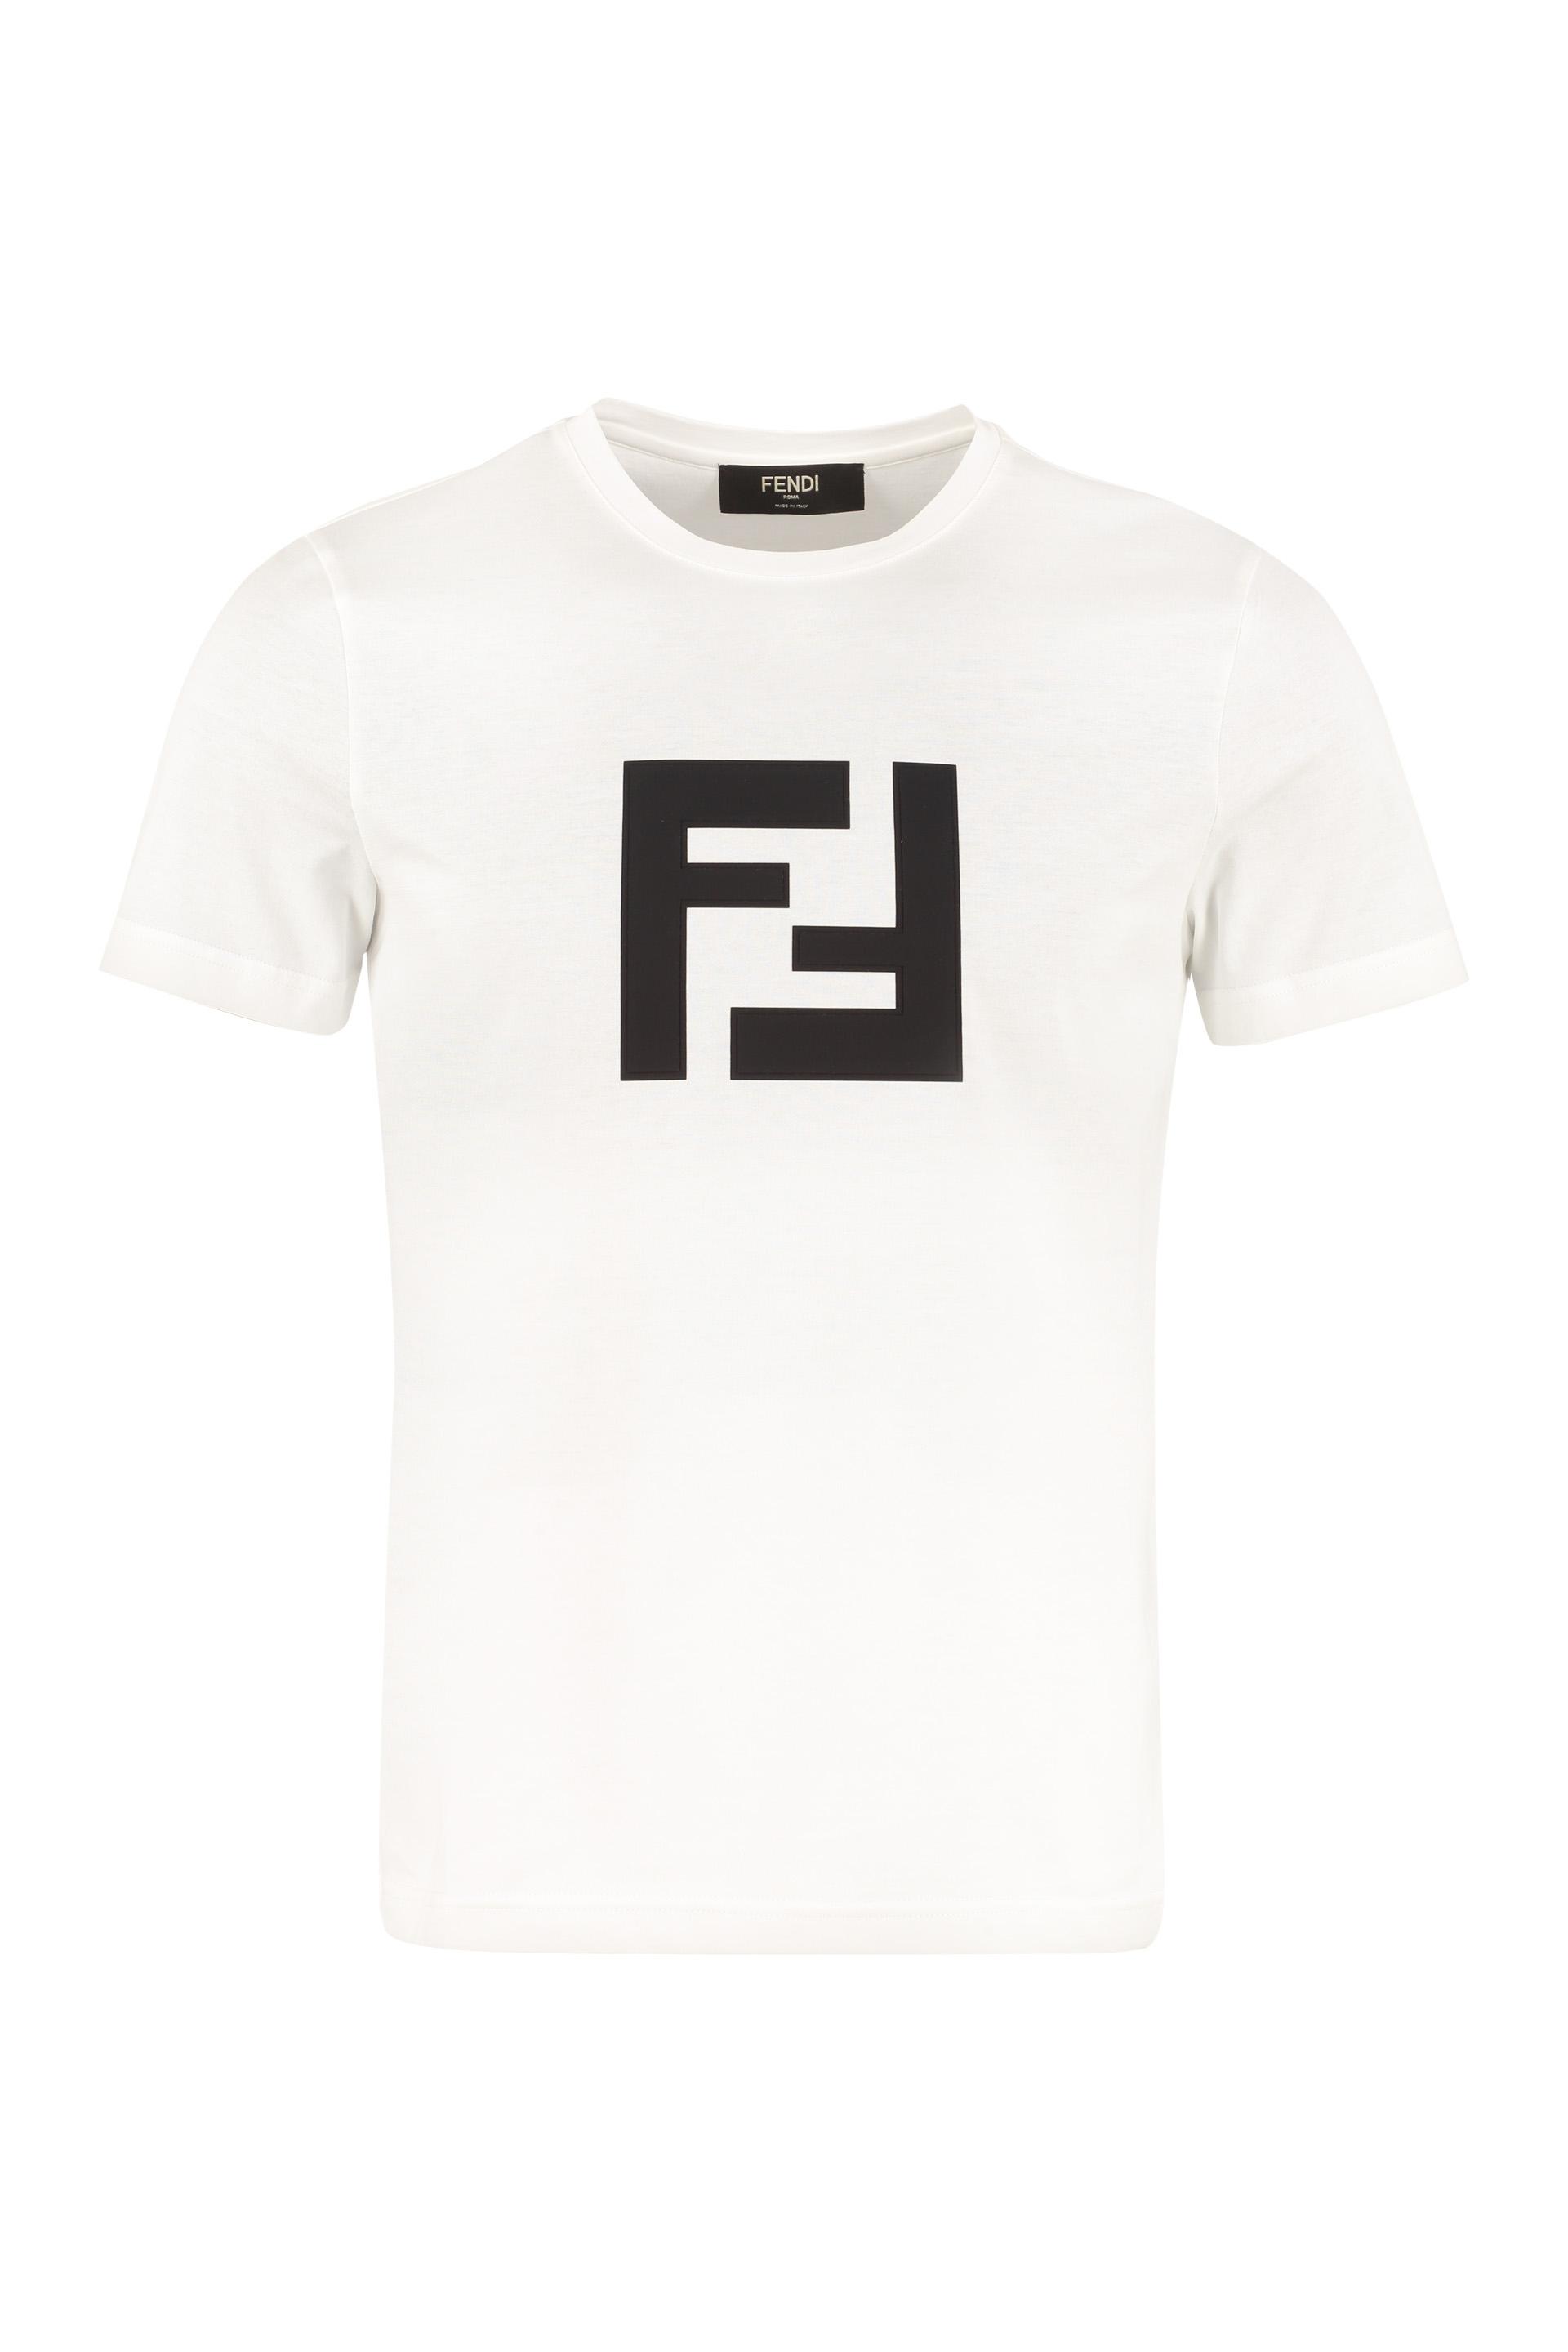 Fendi Synthetic Ff Logo T-shirt in White for Men - Save 31% - Lyst